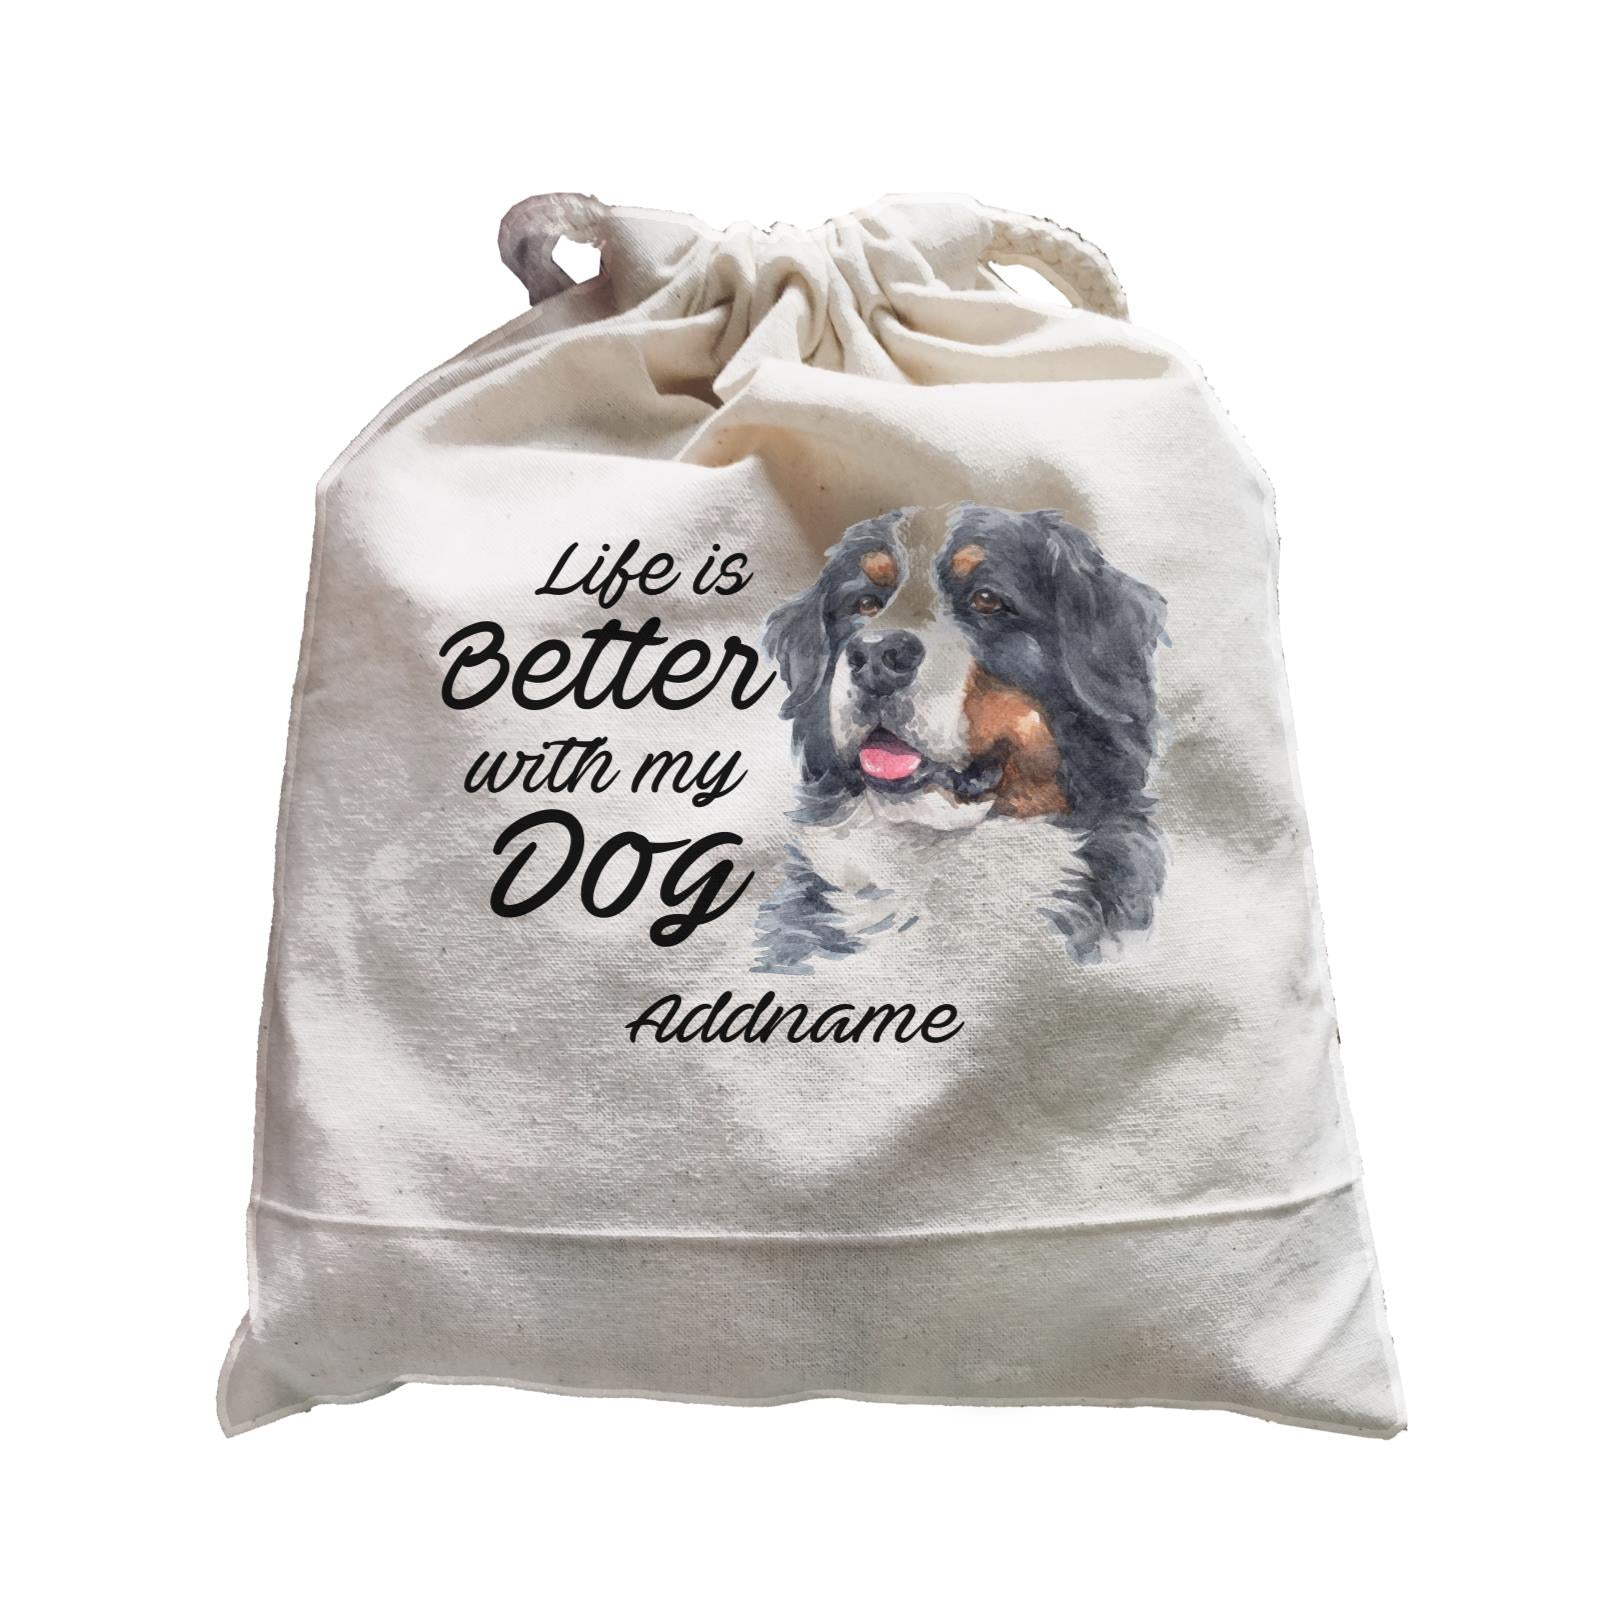 Watercolor Life is Better With My Dog Bernese Mountain Dog Addname Satchel